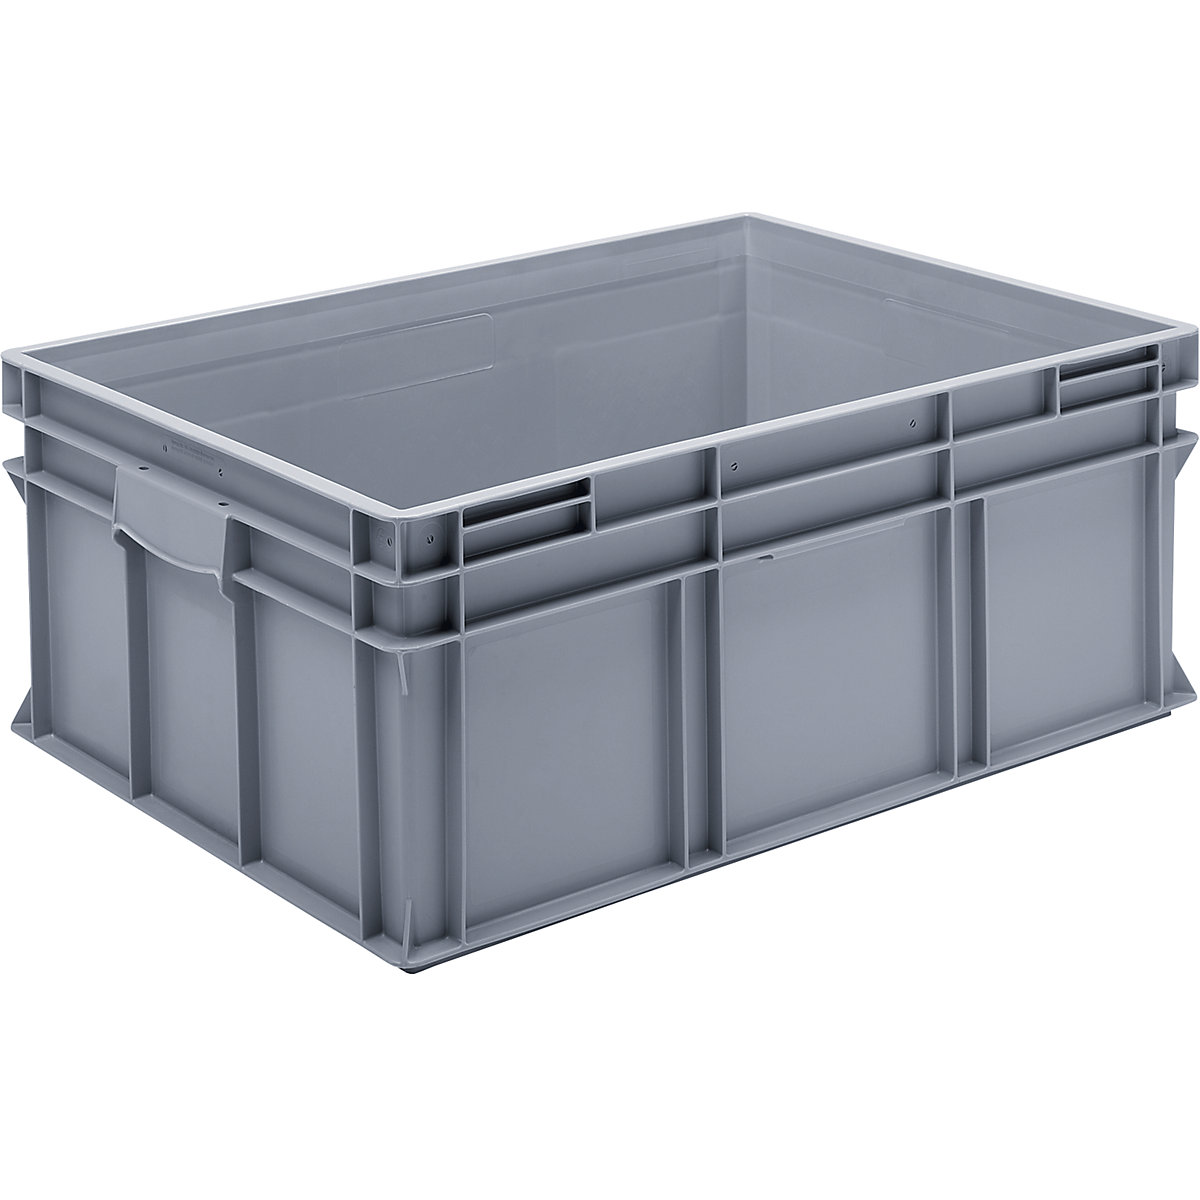 Euro stacking container made of polypropylene (PP), max. load 20 kg, silver grey, capacity 134 l, external height 320 mm, pack of 1